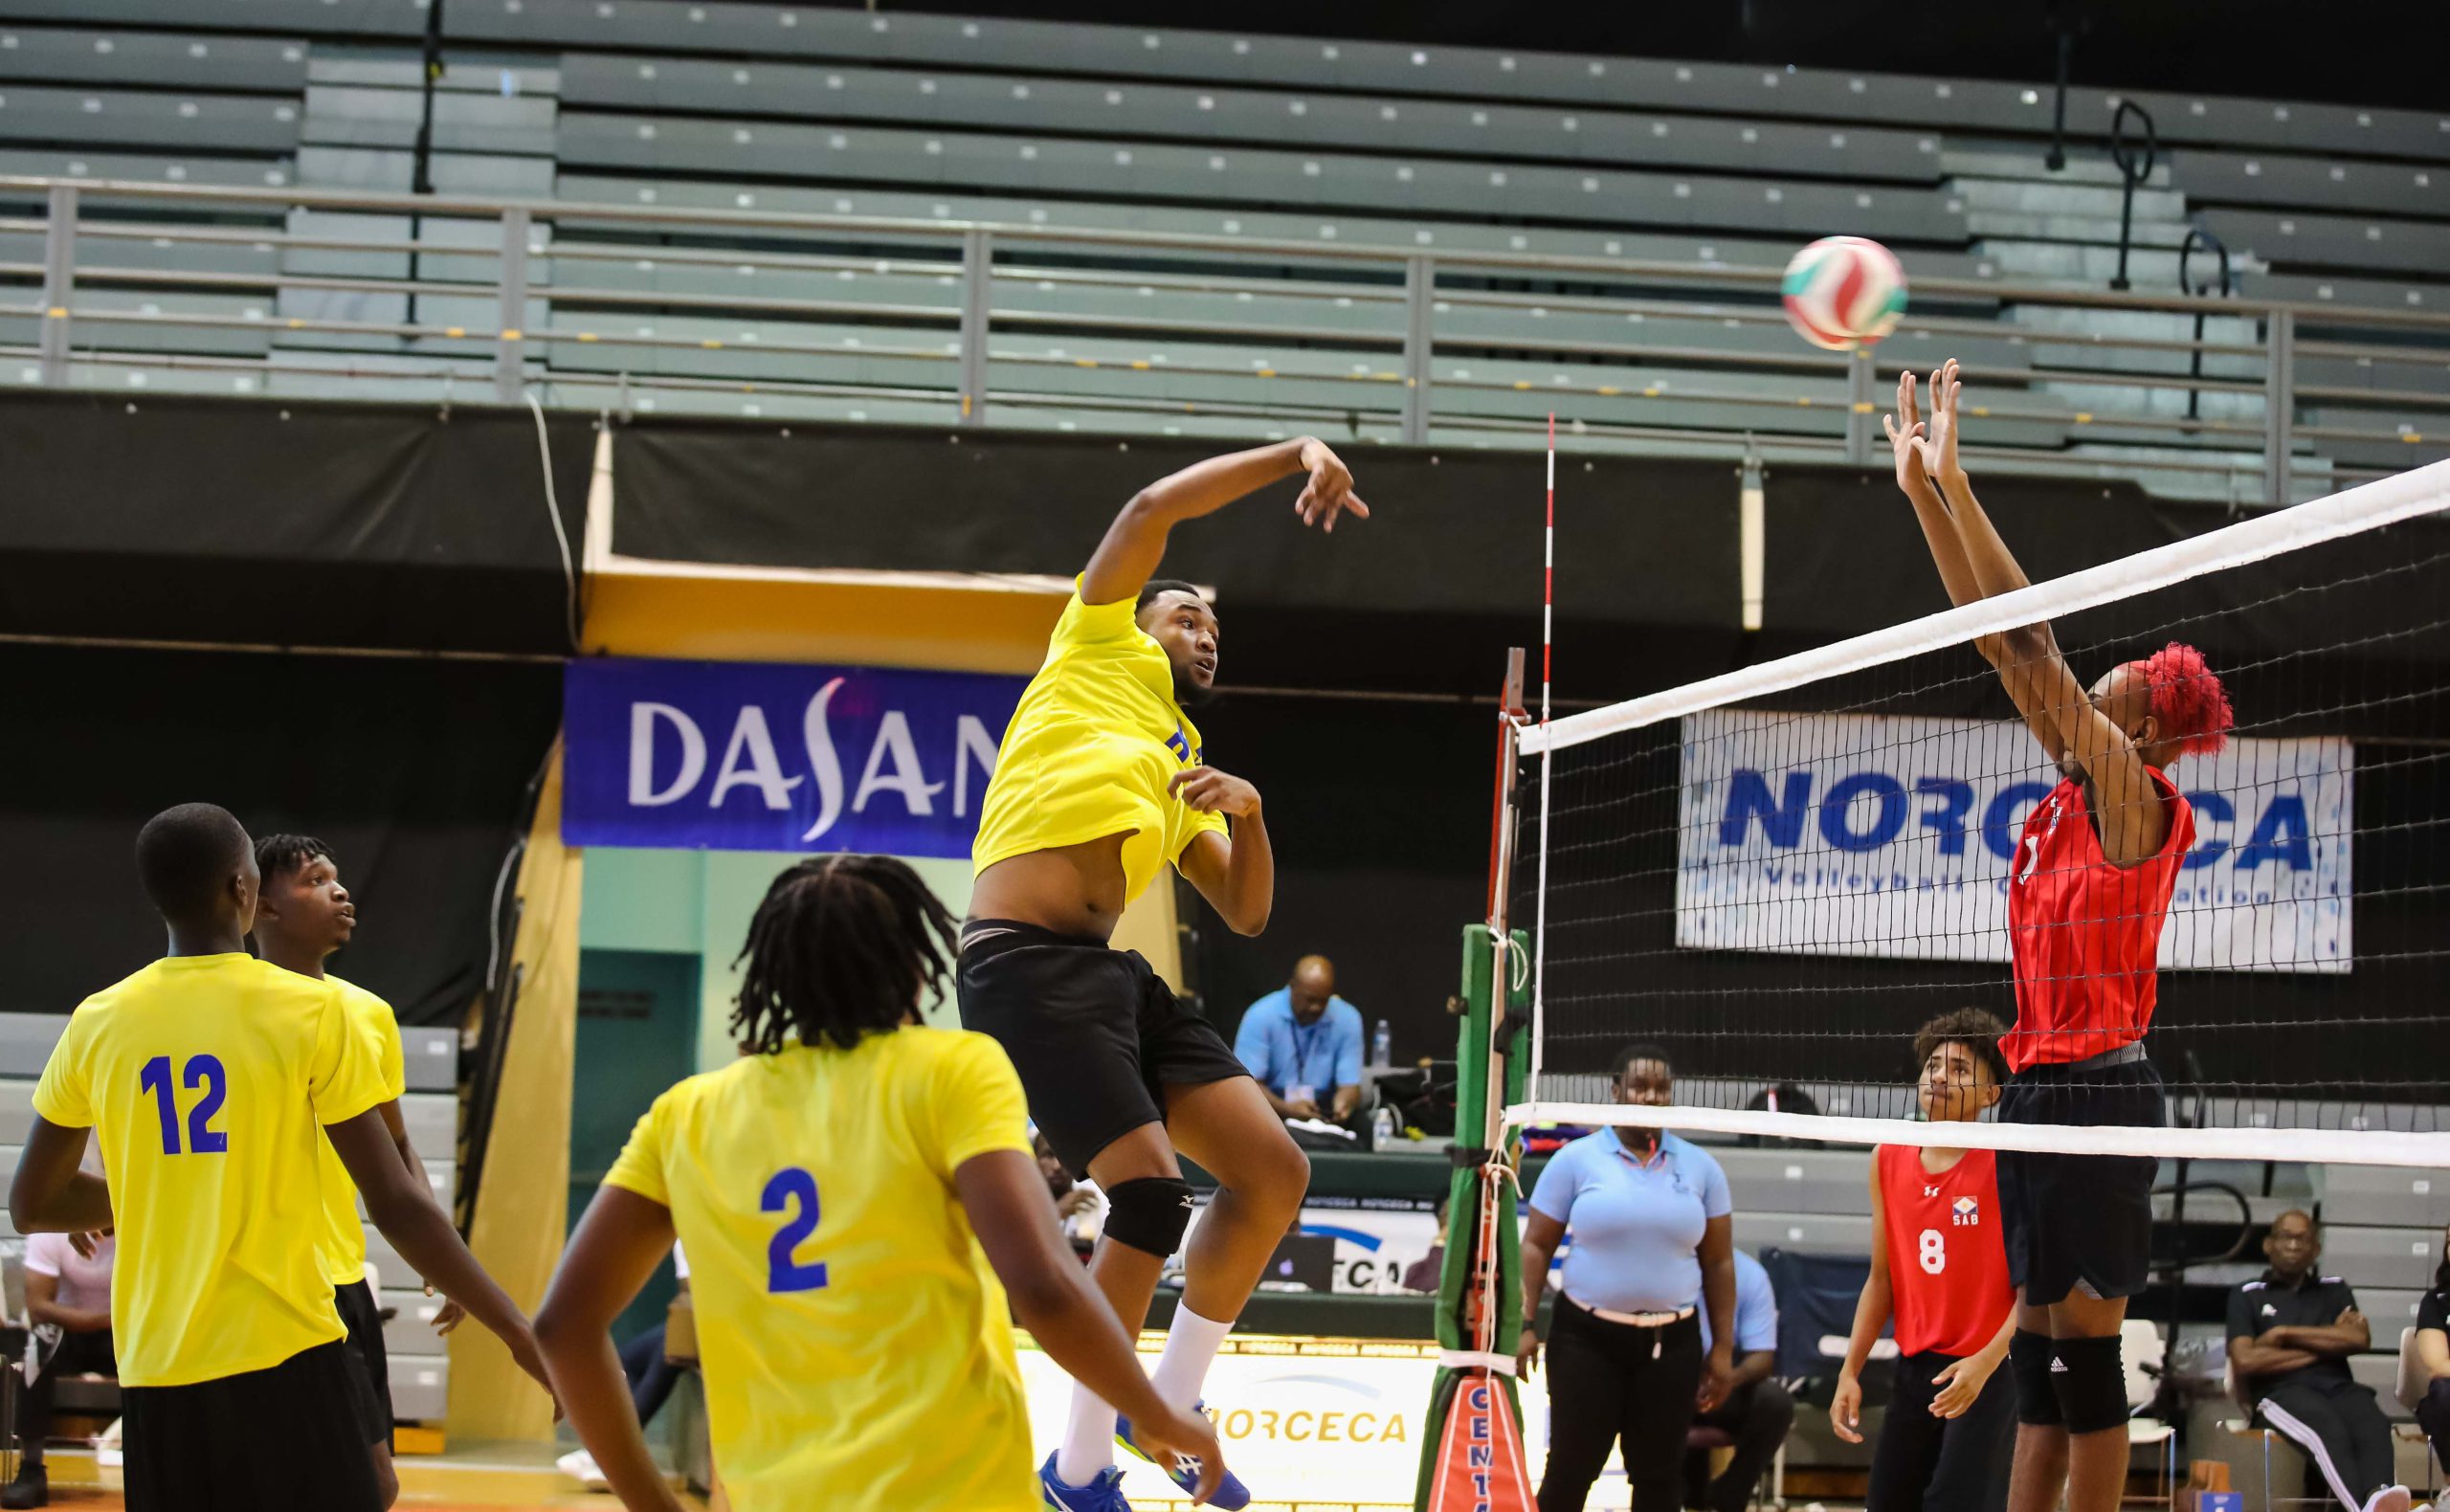 St. Vincent and the Grenadines book spot in semifinals